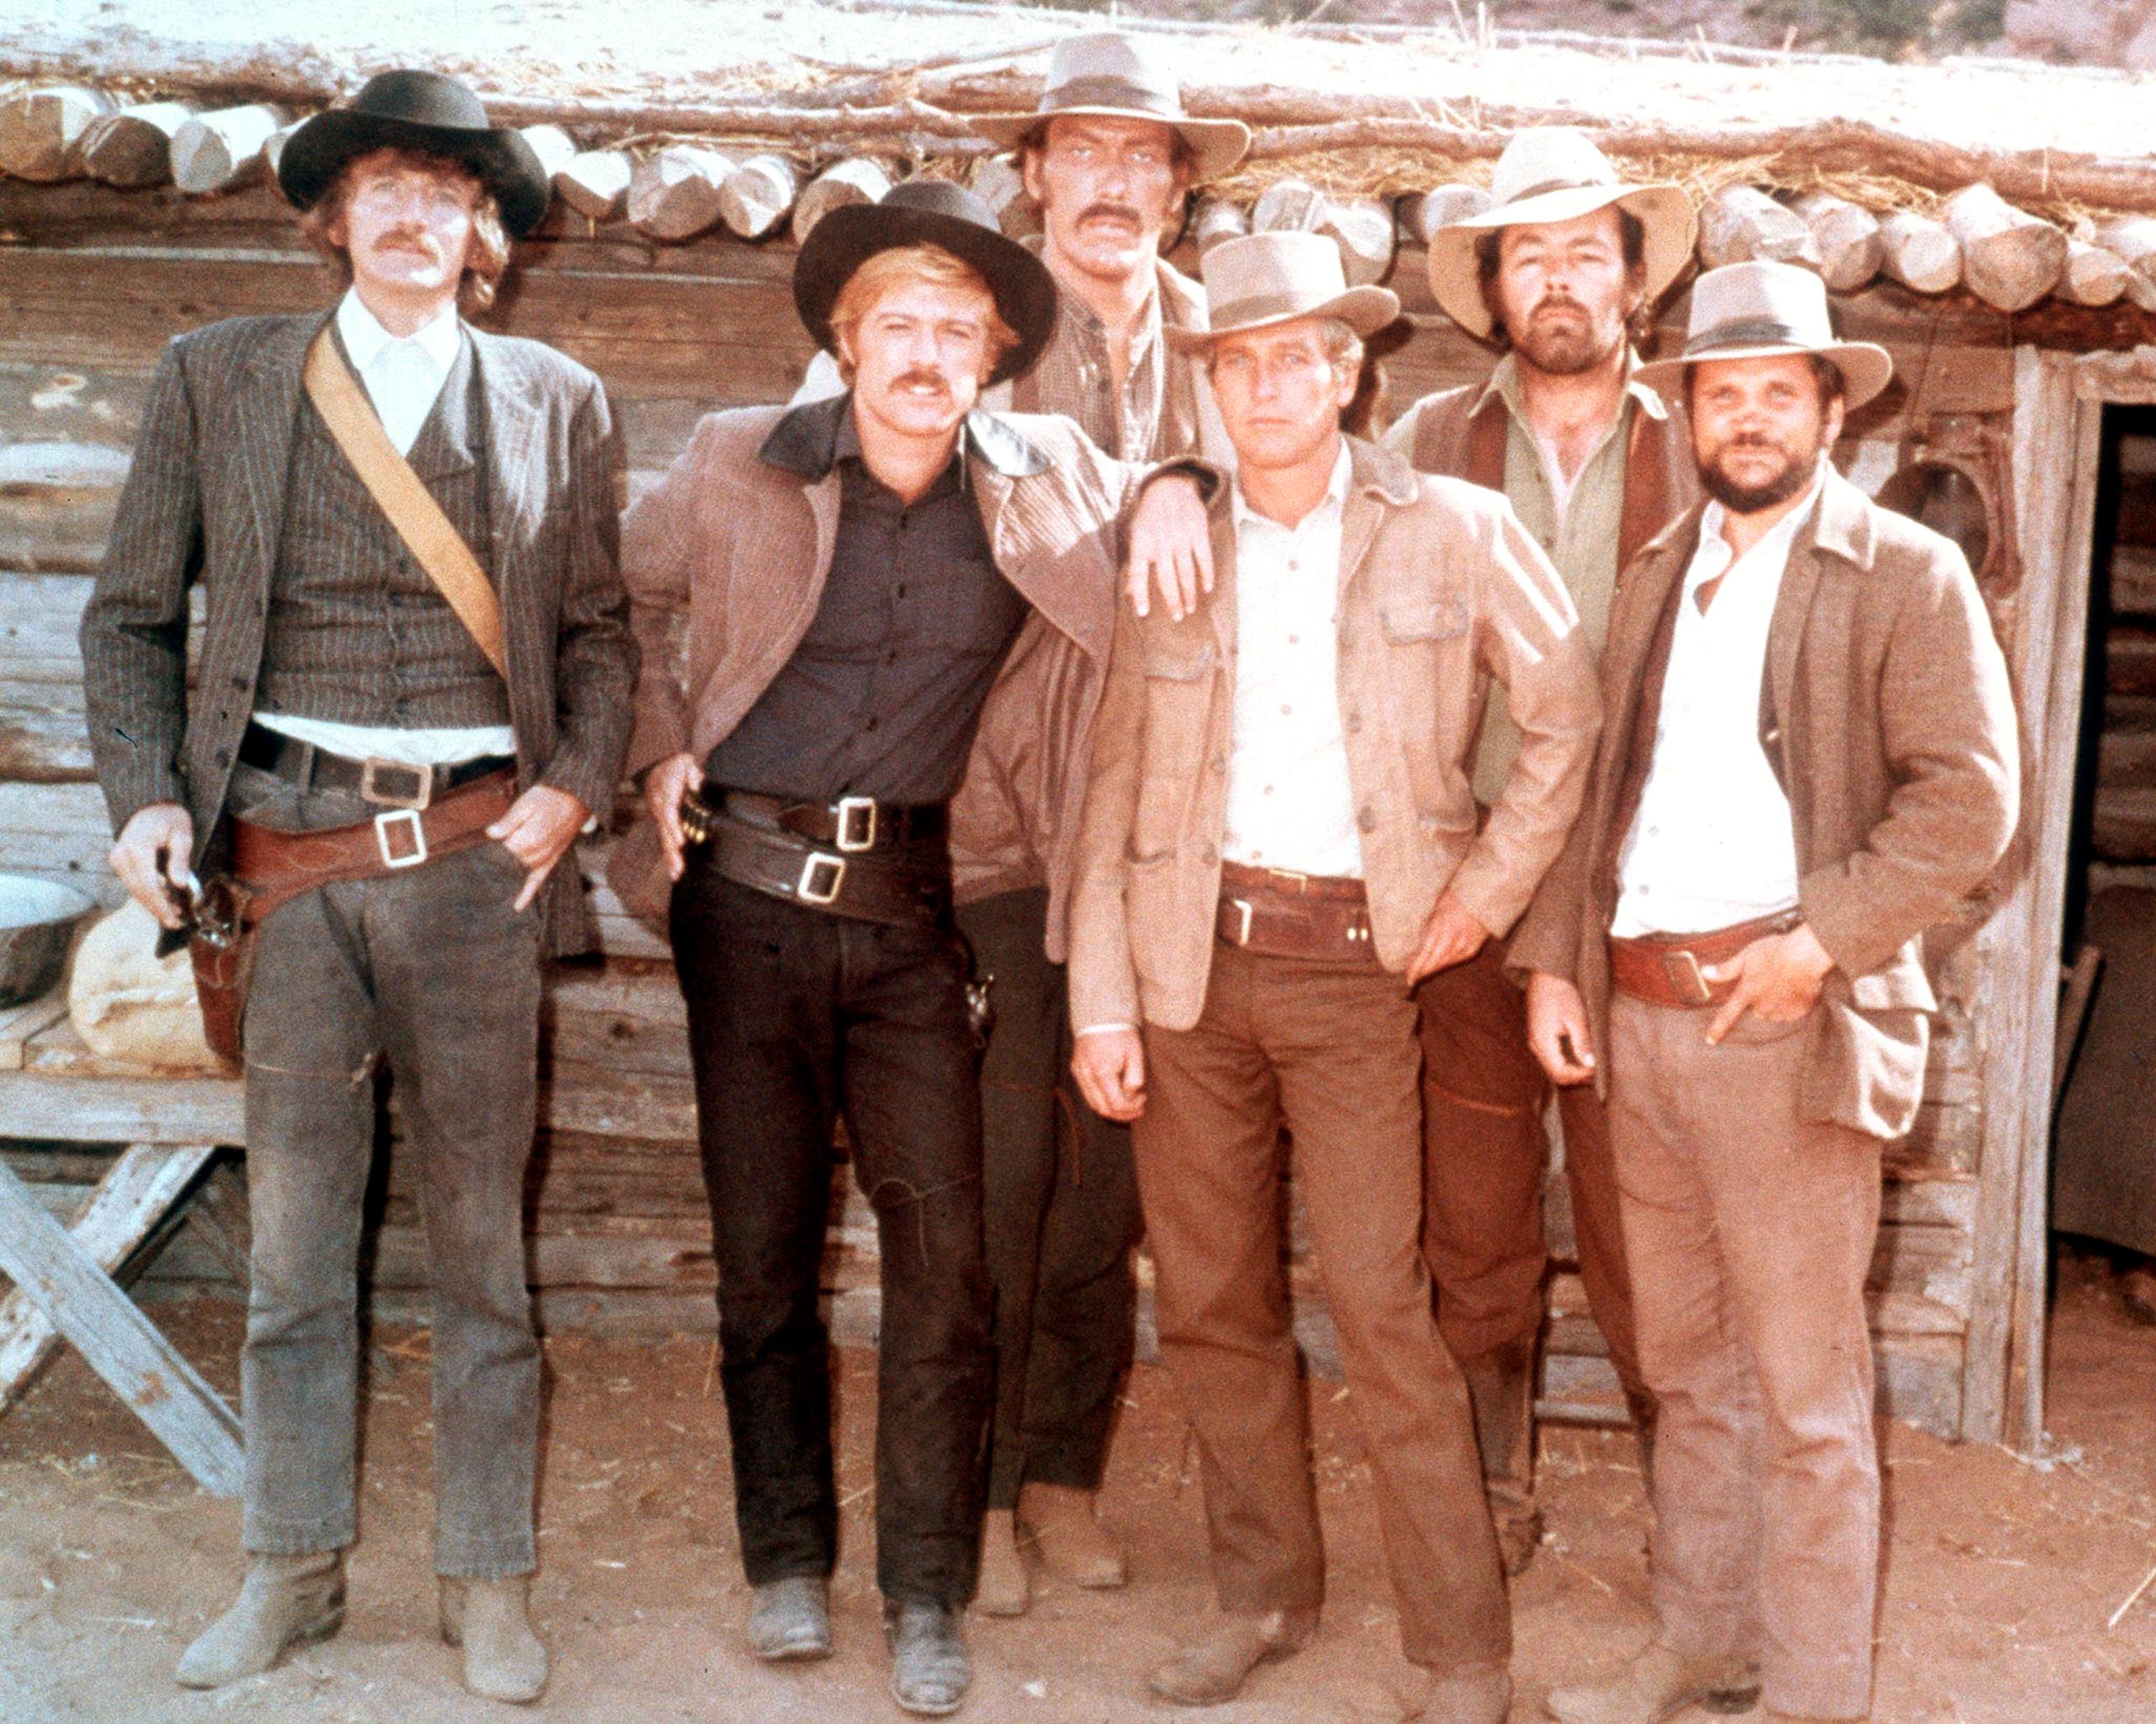 From left: Timothy Scott, US actor, Robert Redford, US actor, Ted Cassidy (1932-1979), US actor, Paul Newman young (1925-2008), US actor, Dave Dunlap and Charles Dierkop, US actor, pose for a group portrait issued as publicity for the film, 'Butch Cassidy and the Sundance Kid